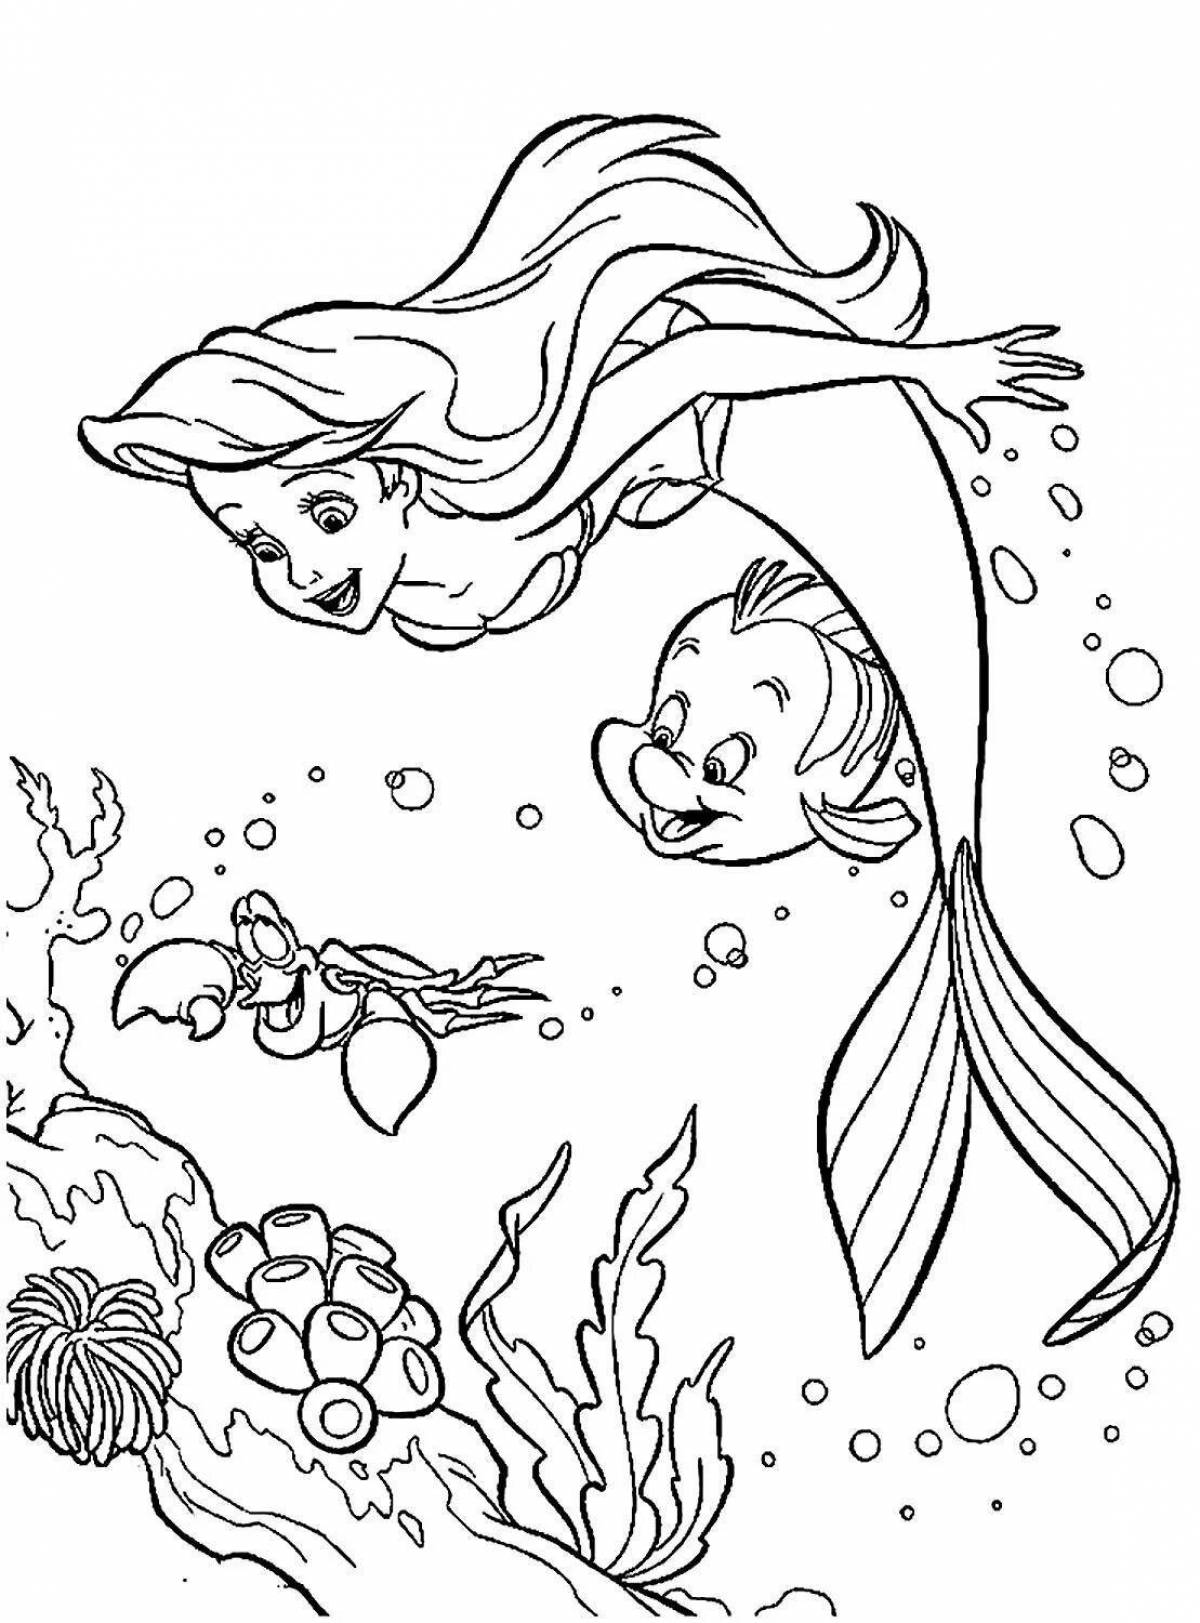 Violent mermaid coloring book for 4-5 year olds